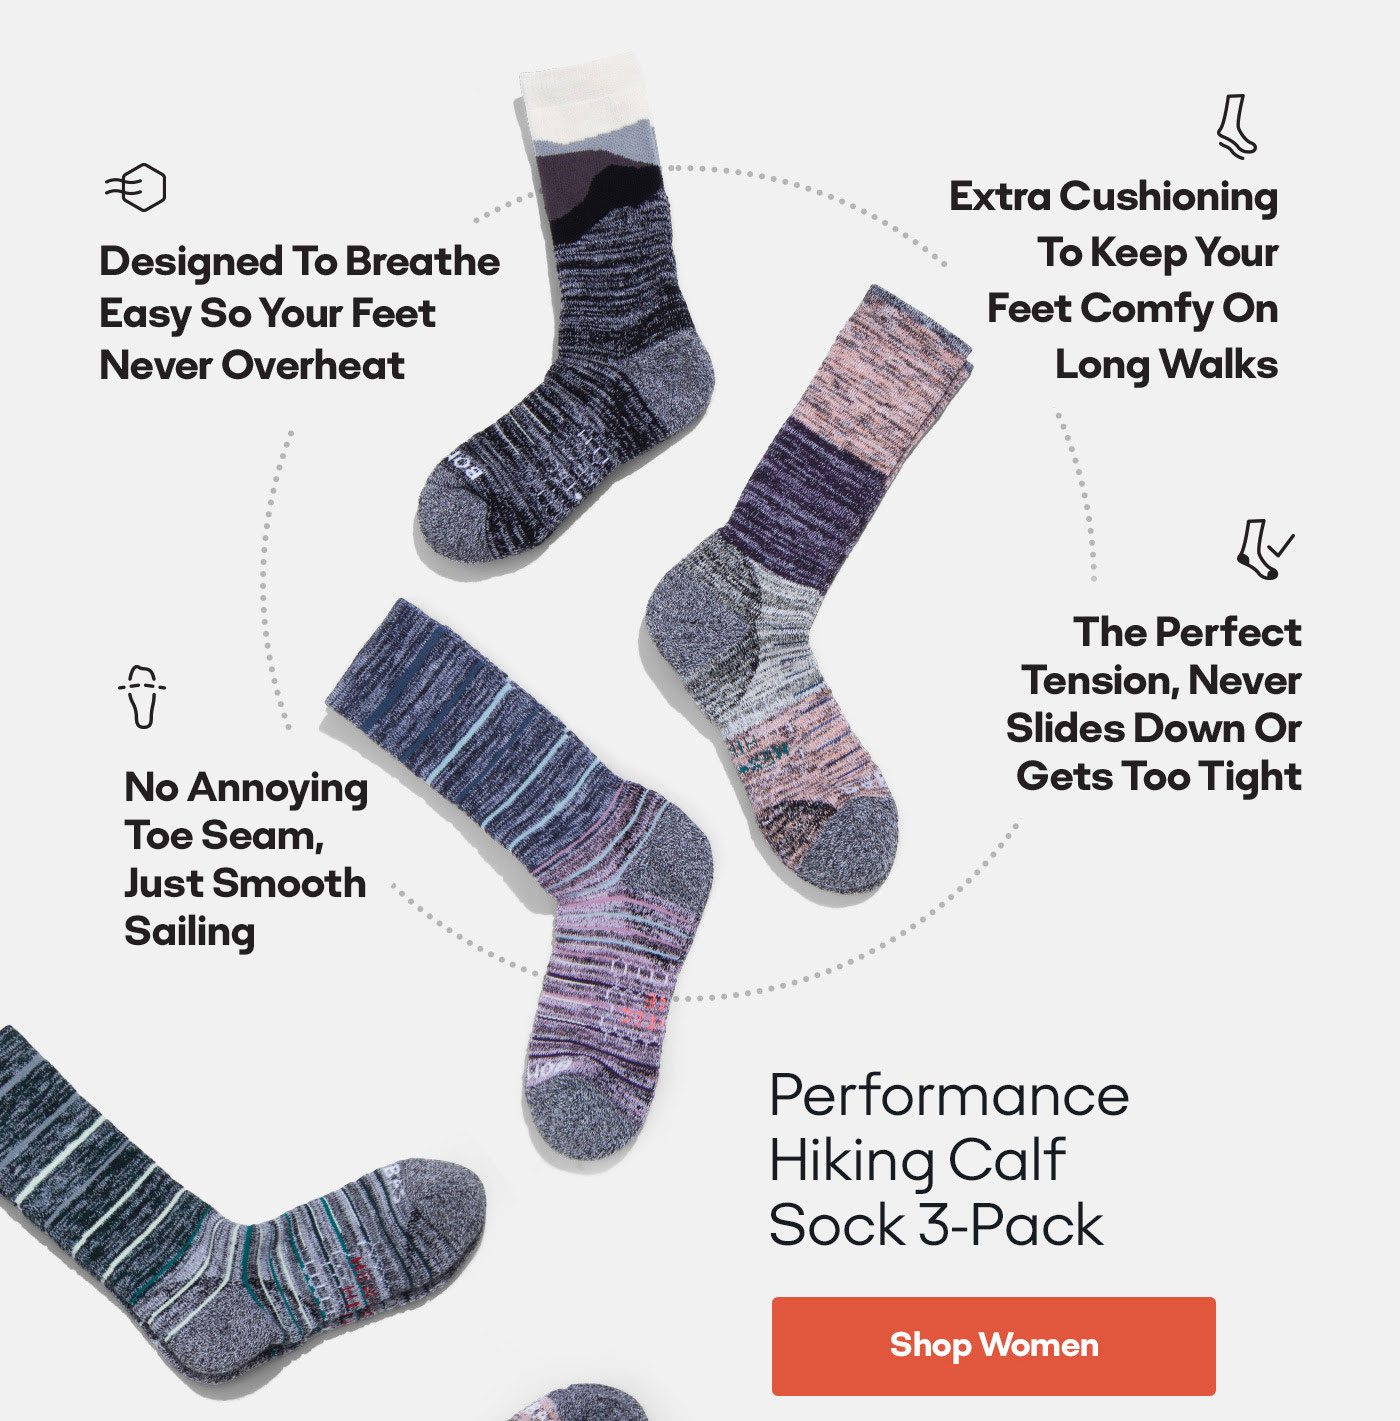 Designed To Breathe Easy So Your Feet Never Overheat | Extra Cushioning To Keep Your Feet Comfy On Long Walks | To Annoying Toe Seam, Just Smooth Sailing | The Perfect Tension, Never Slides Down Or Gets Too Tight | Performance Hiking Calf Sock 3-Pack | [Shop Women]